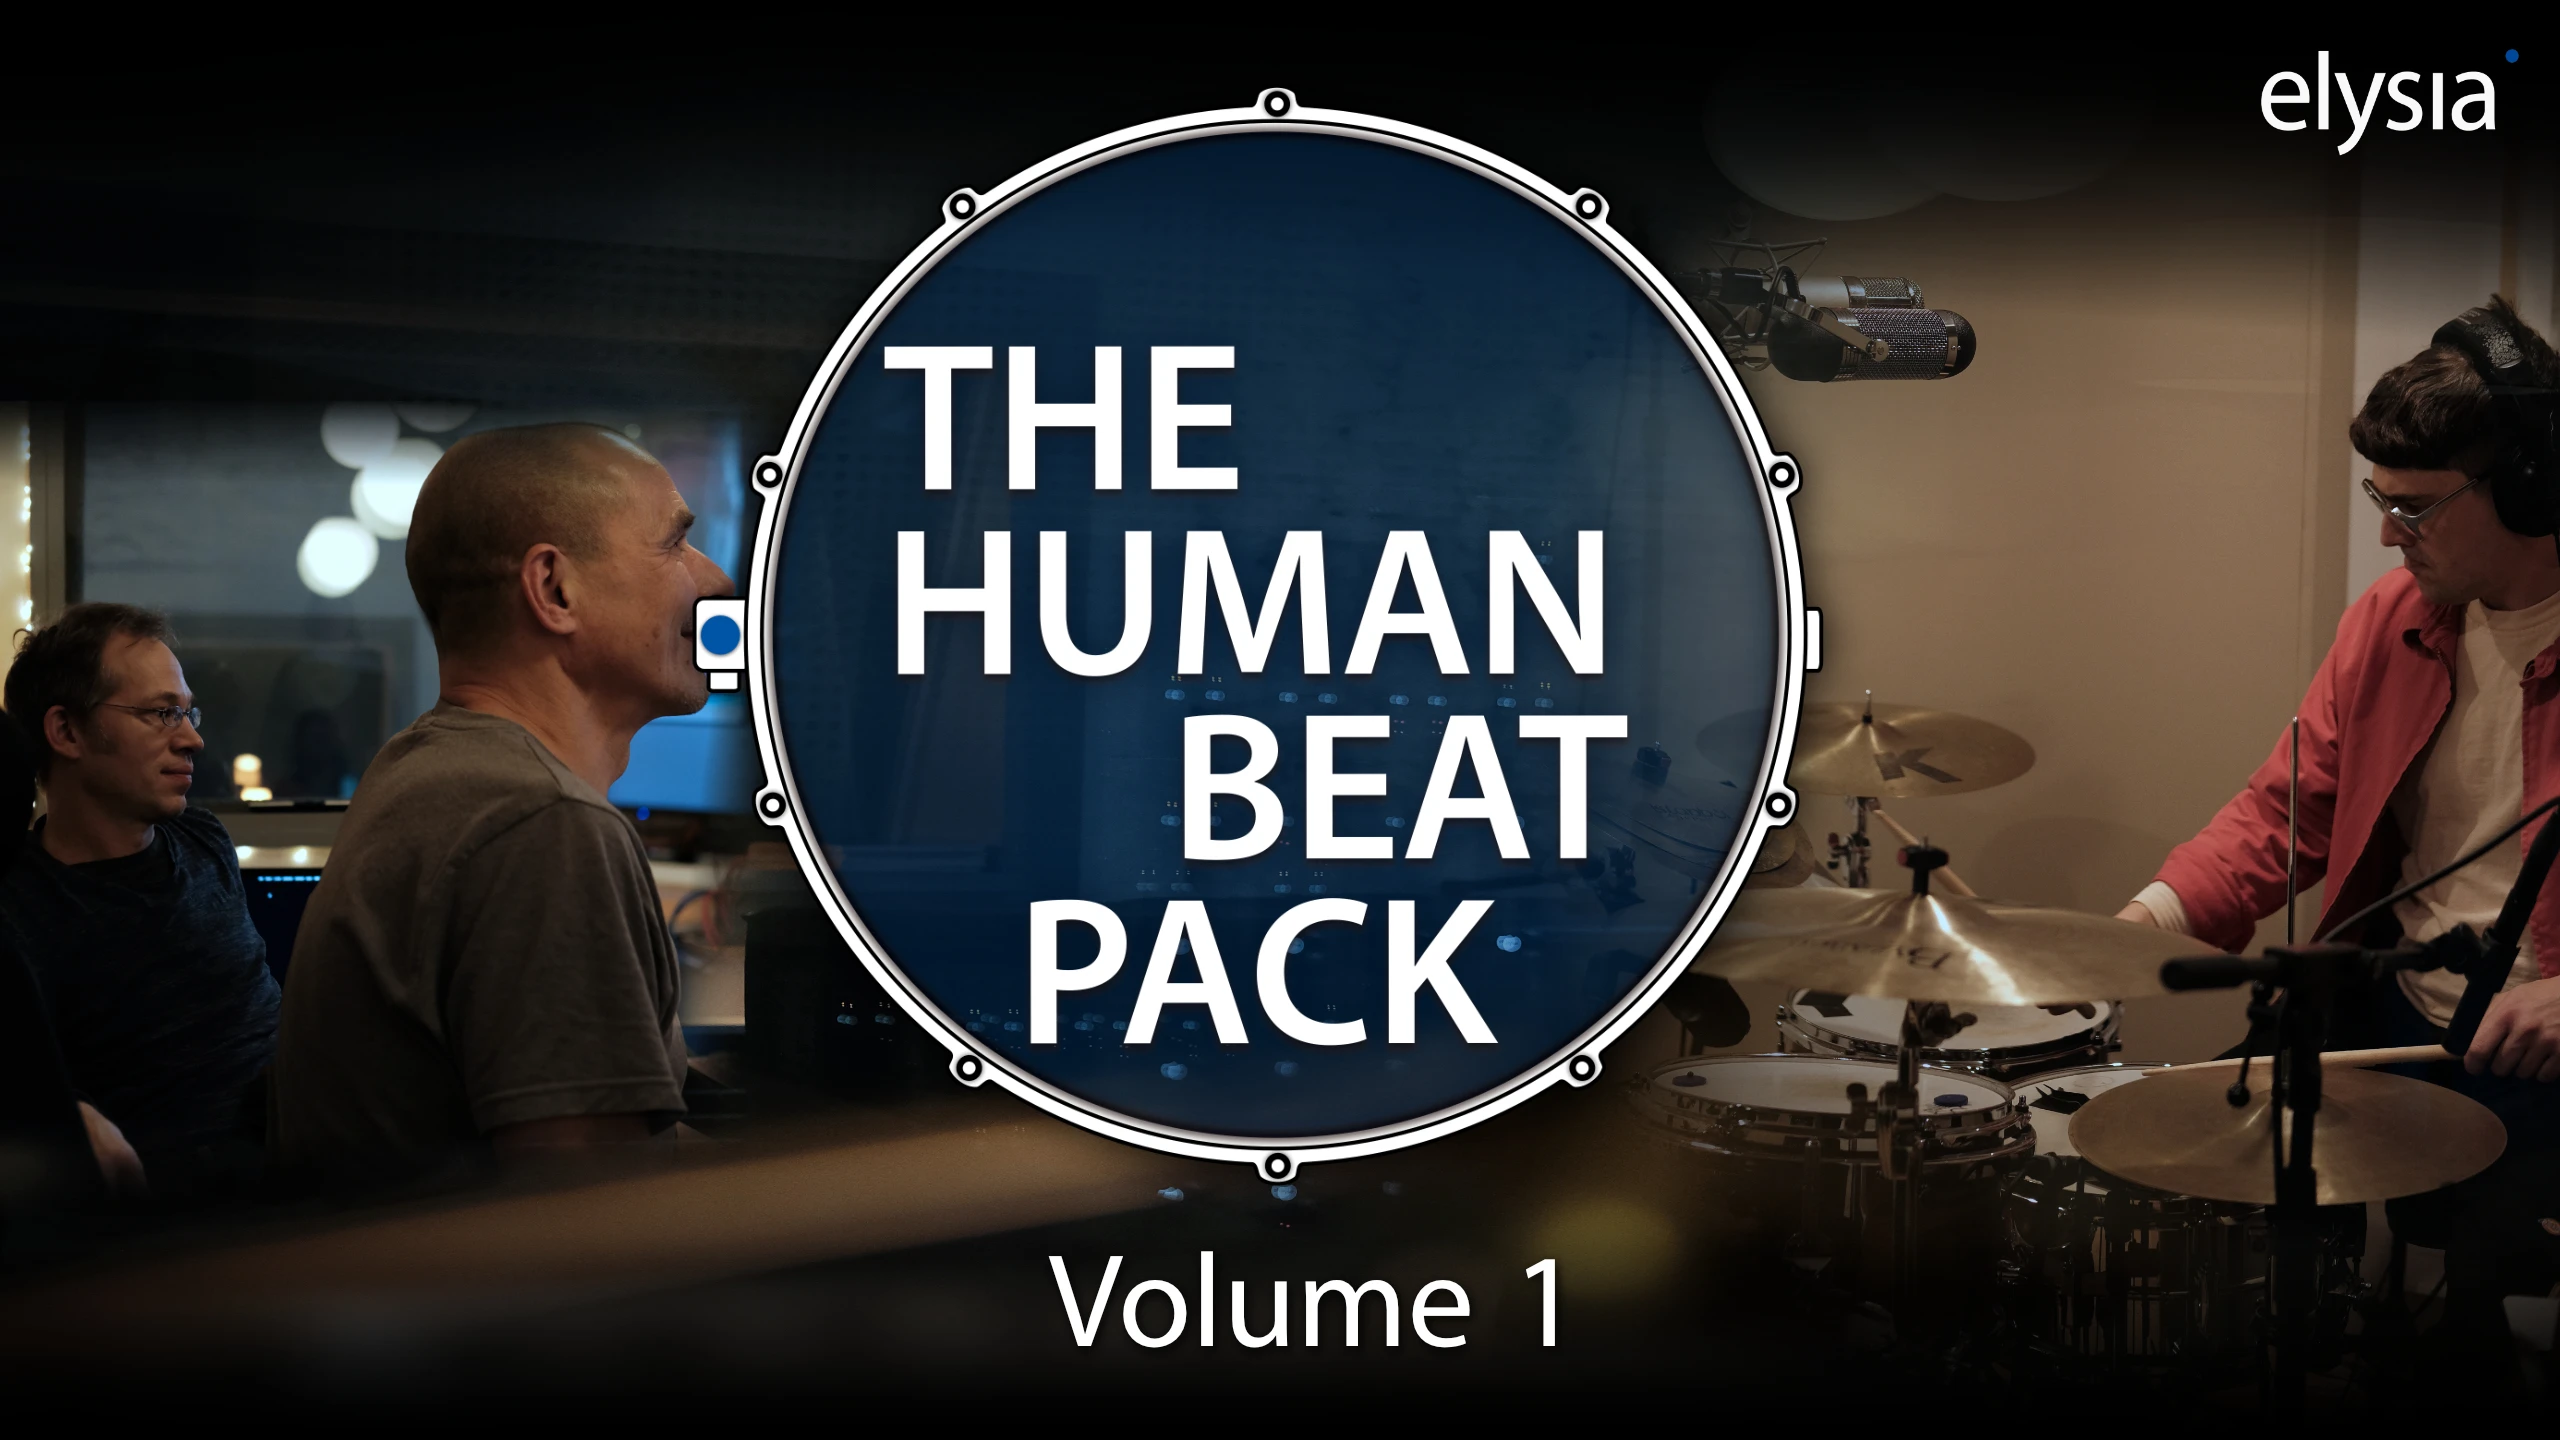 The Making of THE HUMAN BEAT PACK